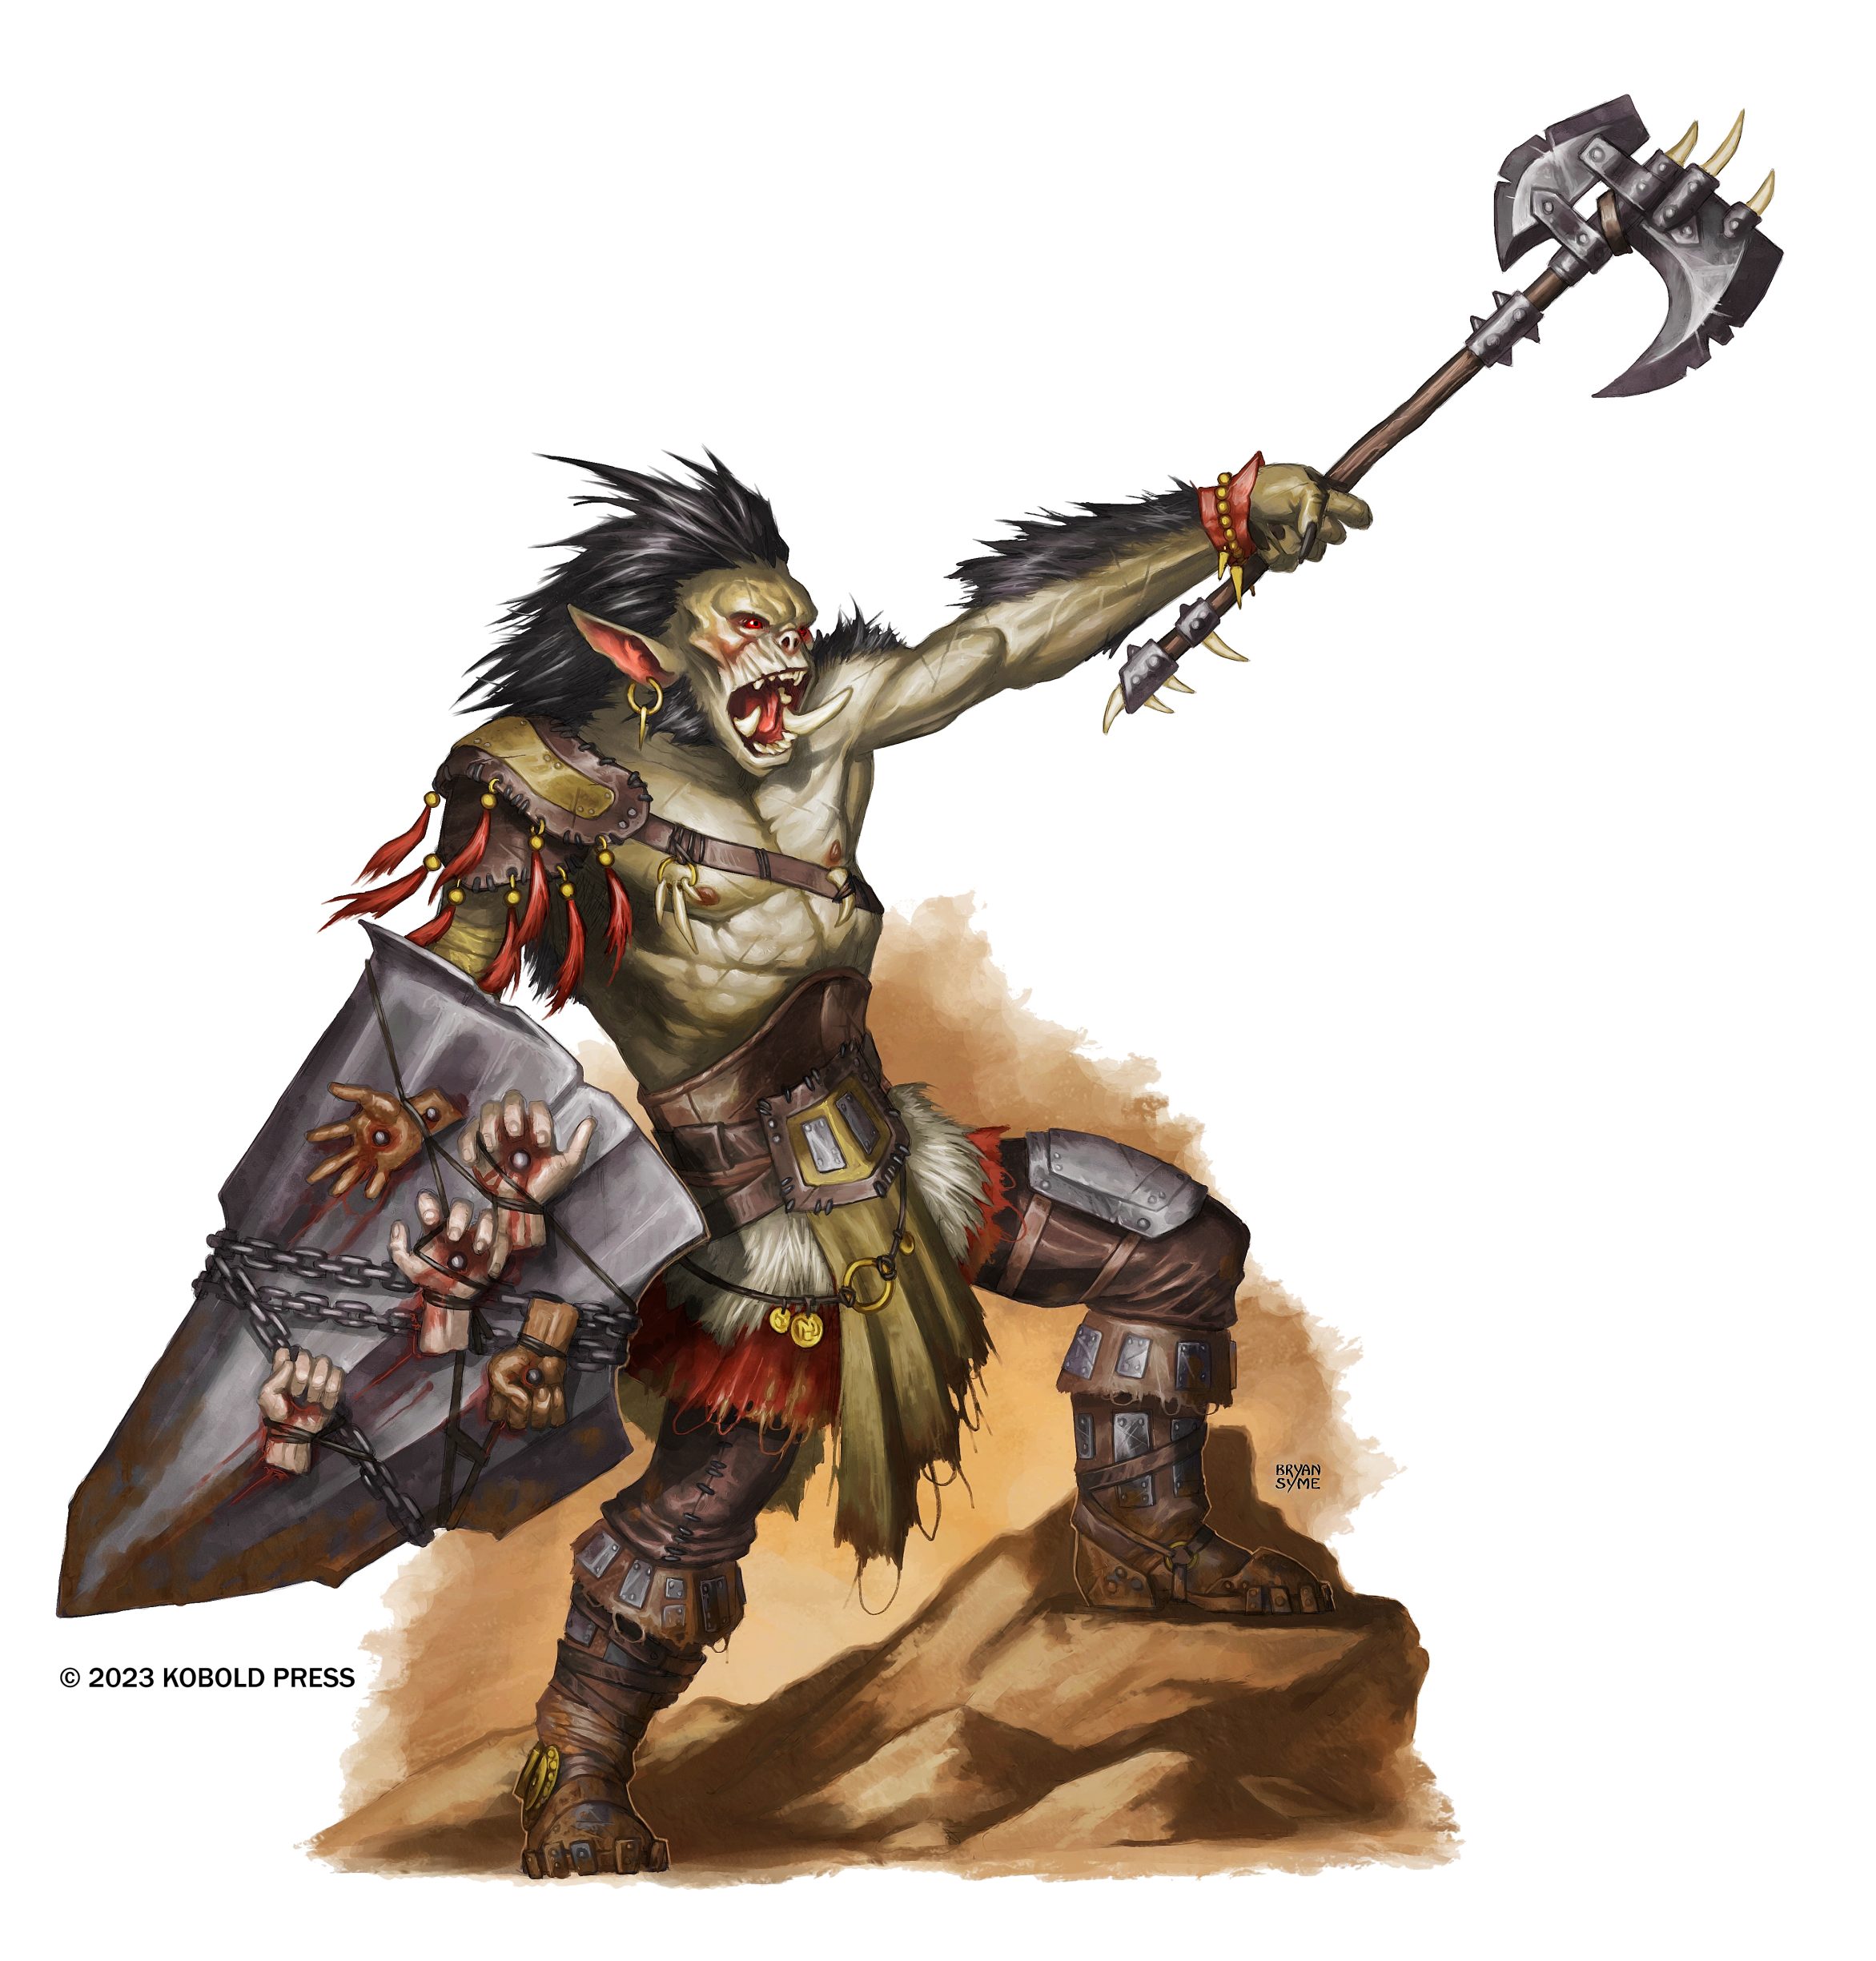 A strong Orc with a shield stands atop a rock raising his battle axe in celebration on the battlefield.